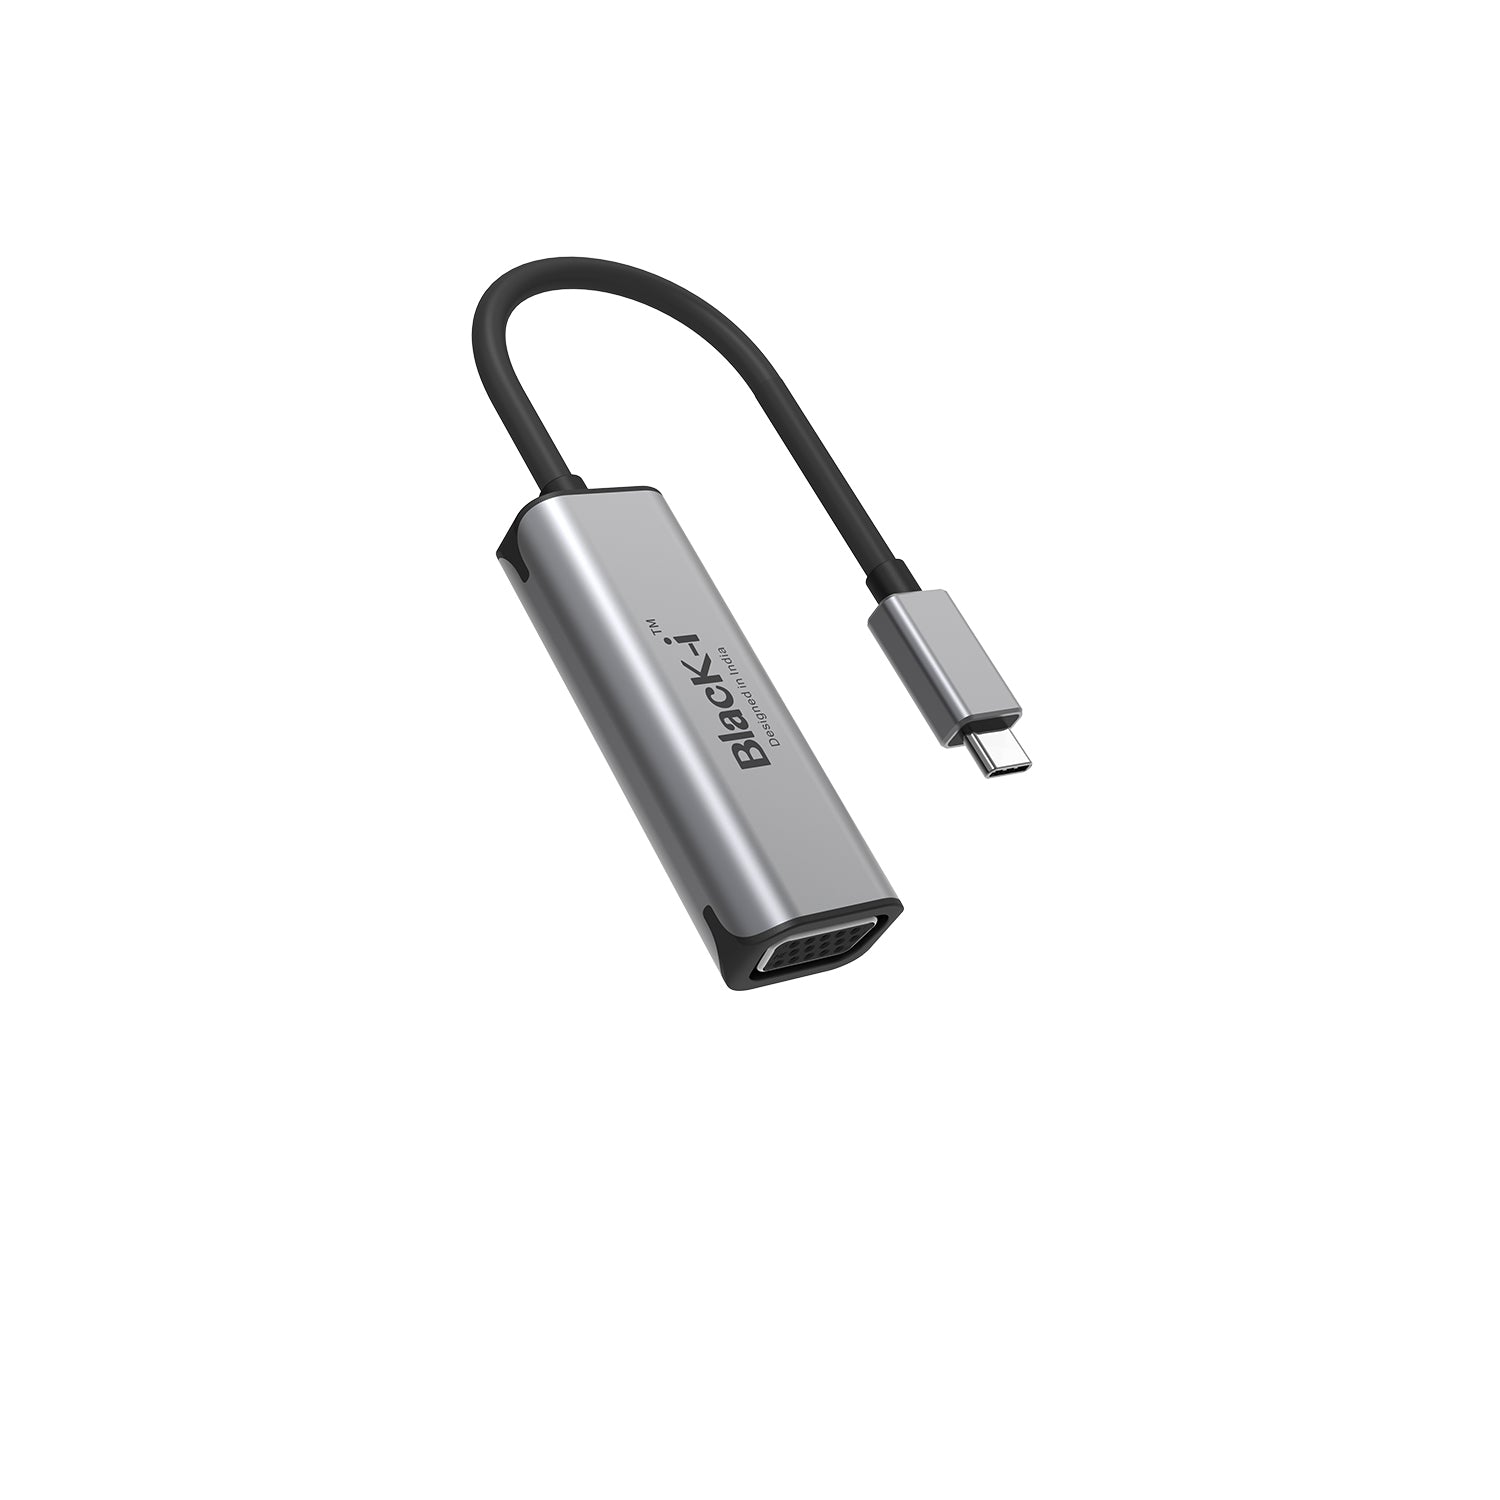 Black-i USB-C to VGA Converter – Effortless Connectivity for Enhanced Visual Display in a Compact Design